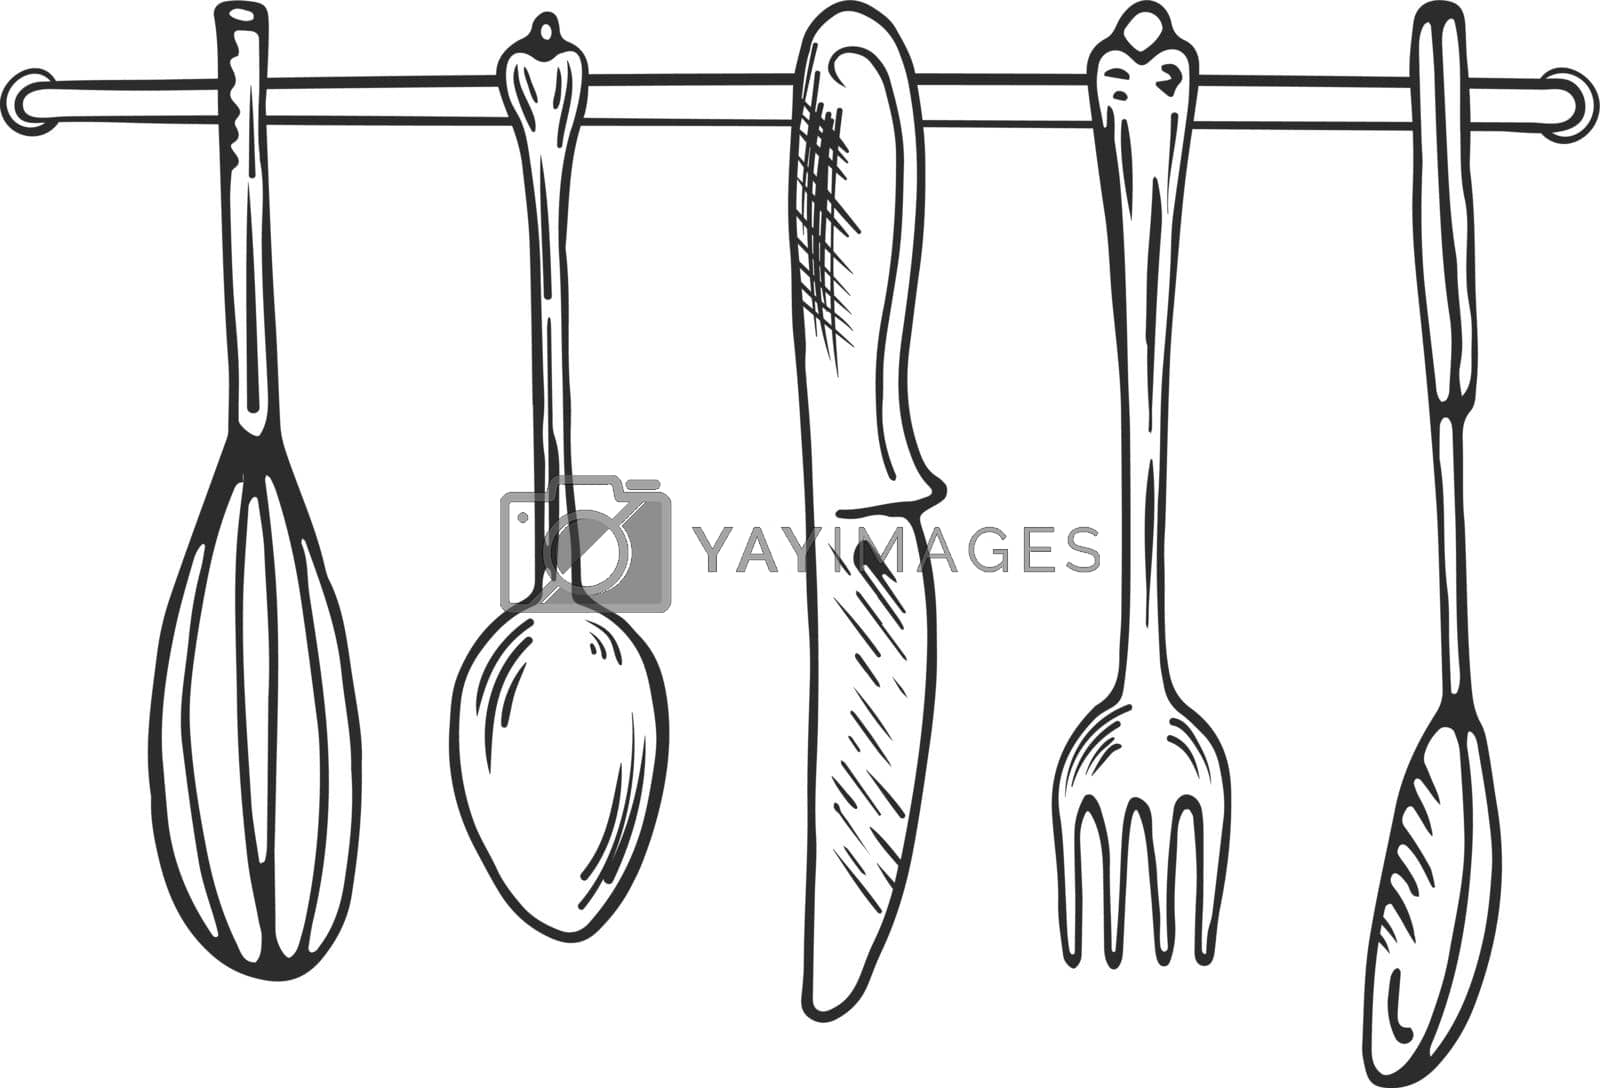 Royalty free image of Cutlery hanging on kitchen wall. Kitchenware black sketch by ONYXprj